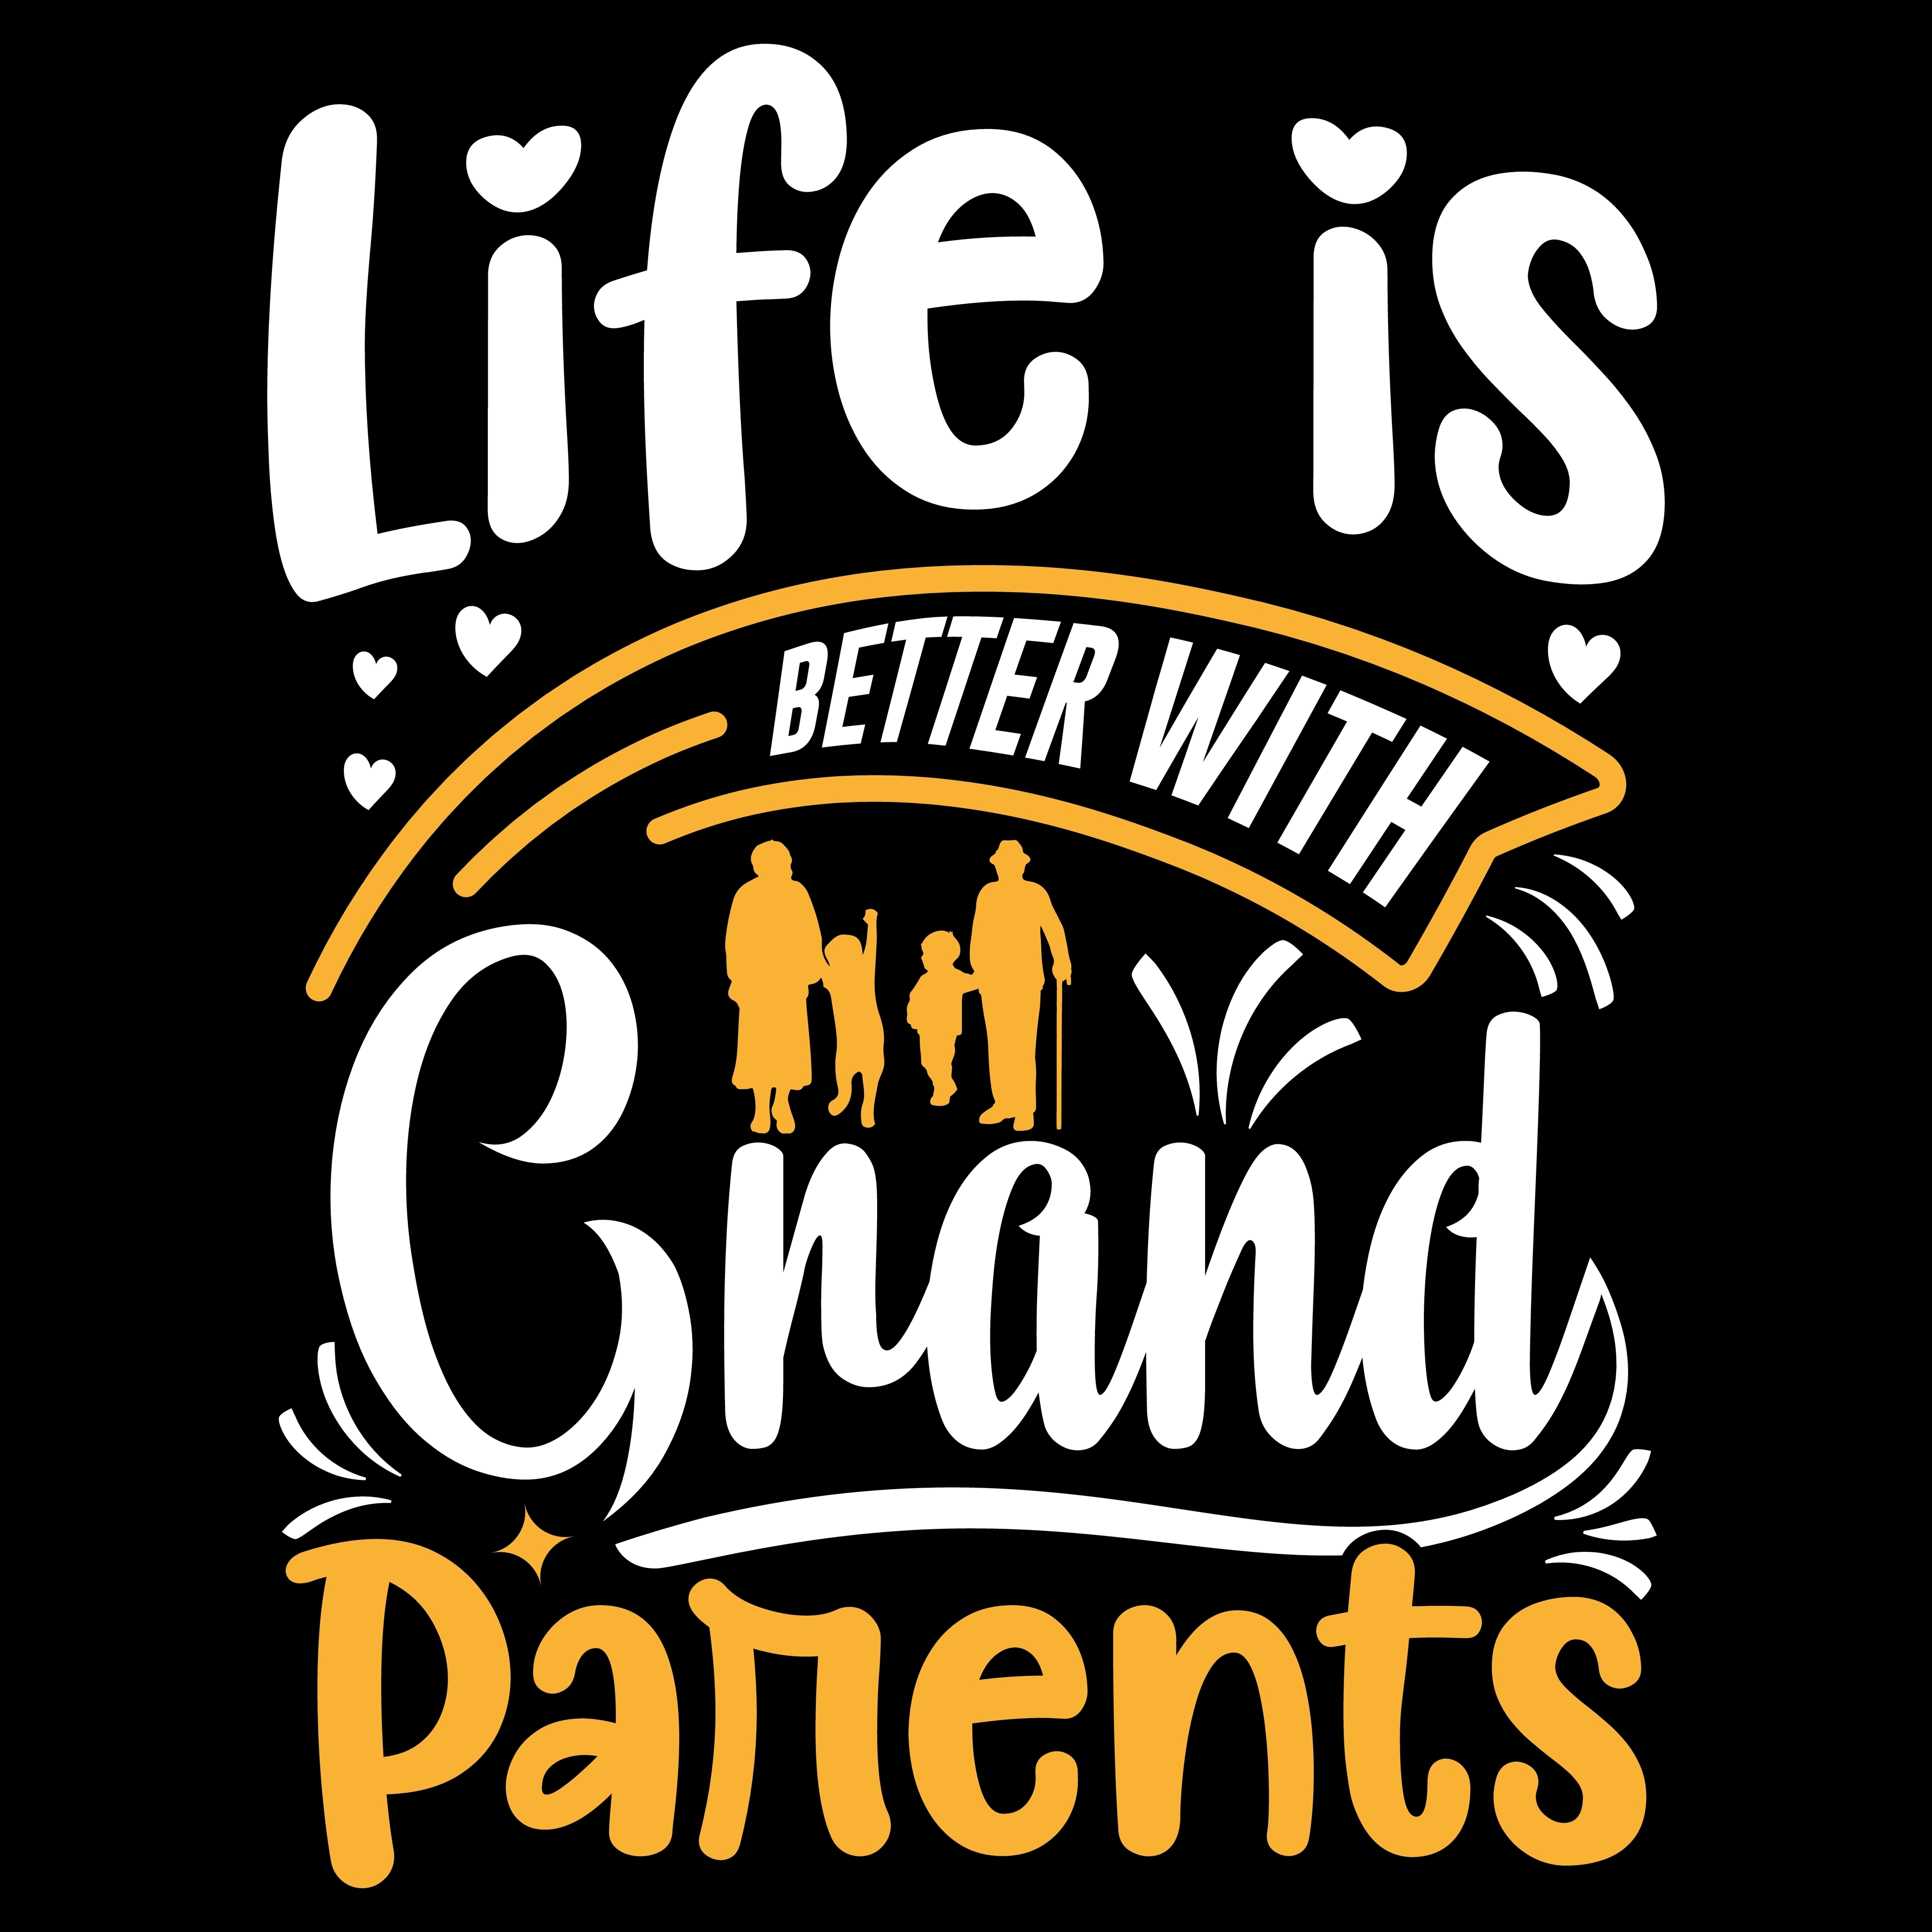 When Is Grandparents Day 2023? Everything To Know